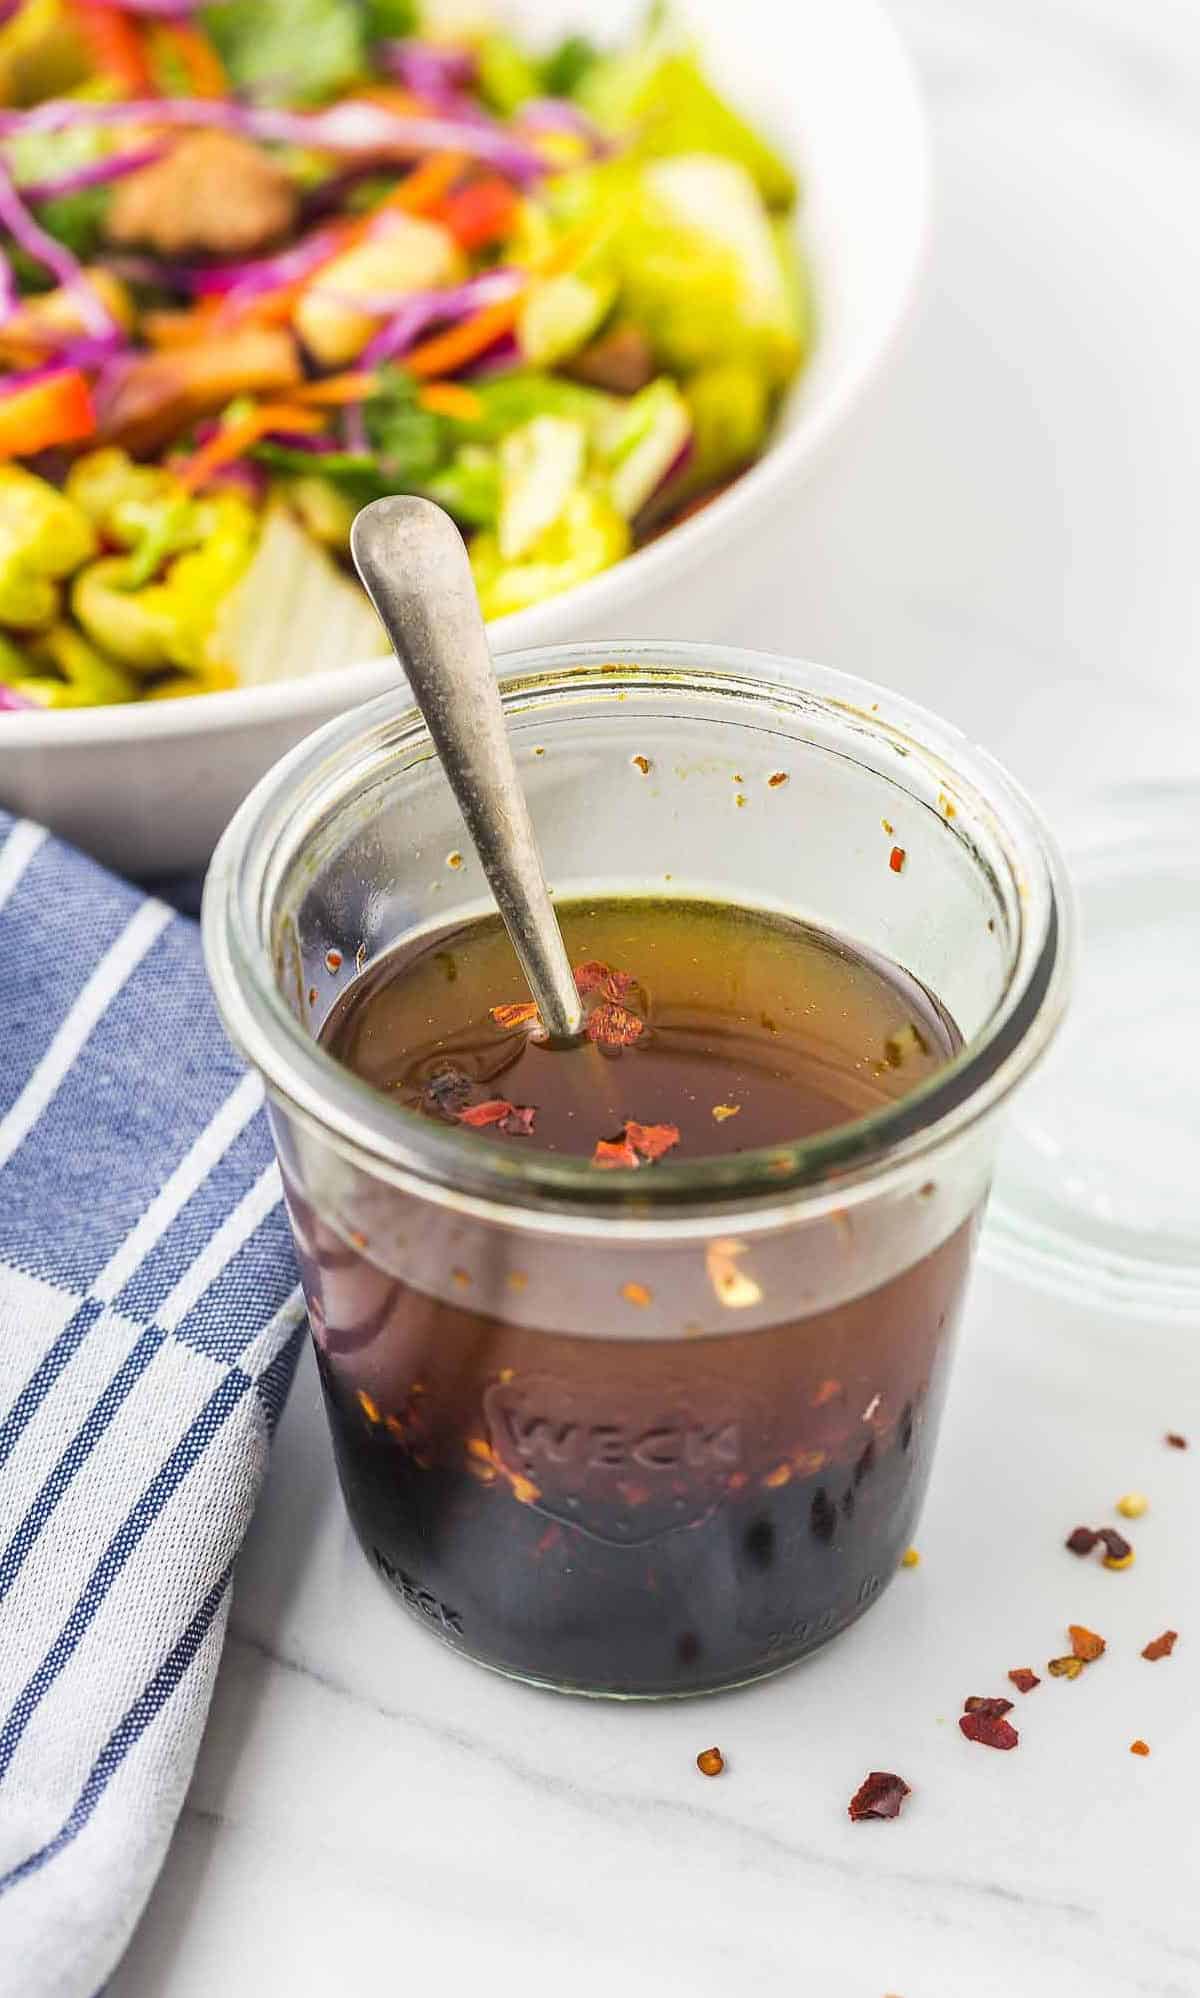  This dressing is so good, you'll want to drink it straight from the bottle.